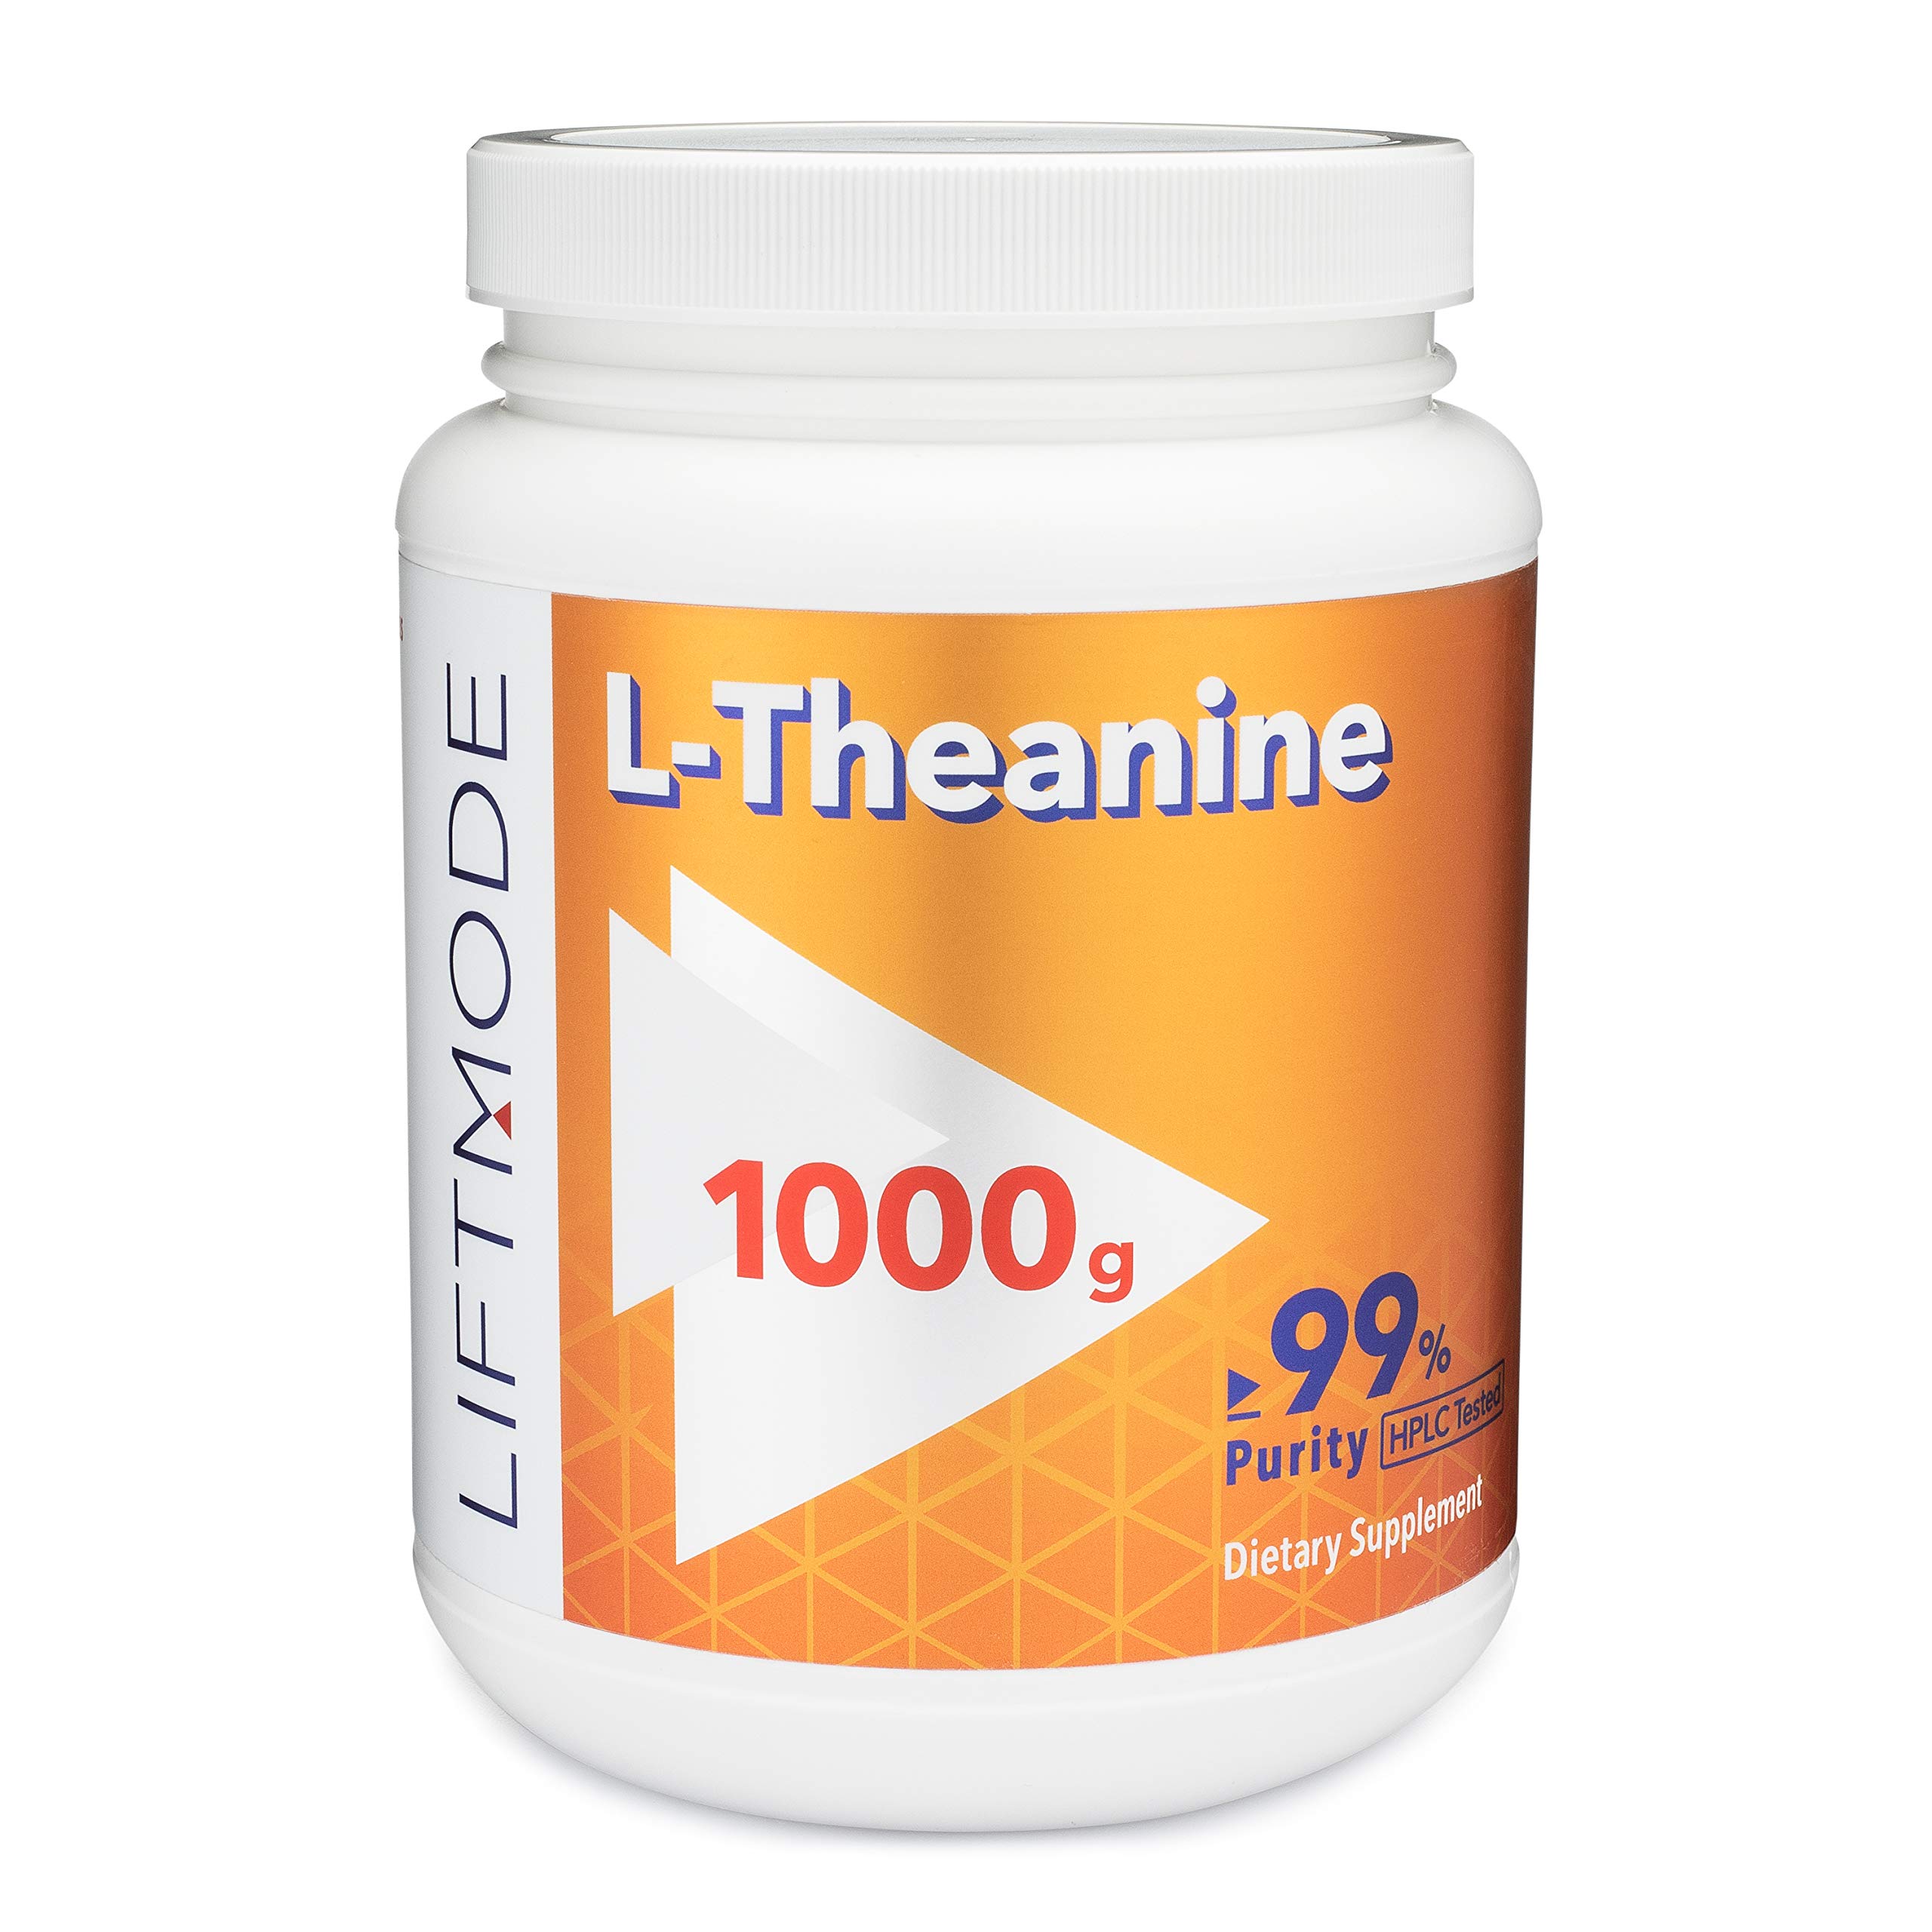 LiftMode L-Theanine Powder Supplement - for Focus, Stress Relief, Weight Loss, Pre Workout - Vegetarian, Vegan, Non-GMO, Gluten Free - 1000 Grams (...